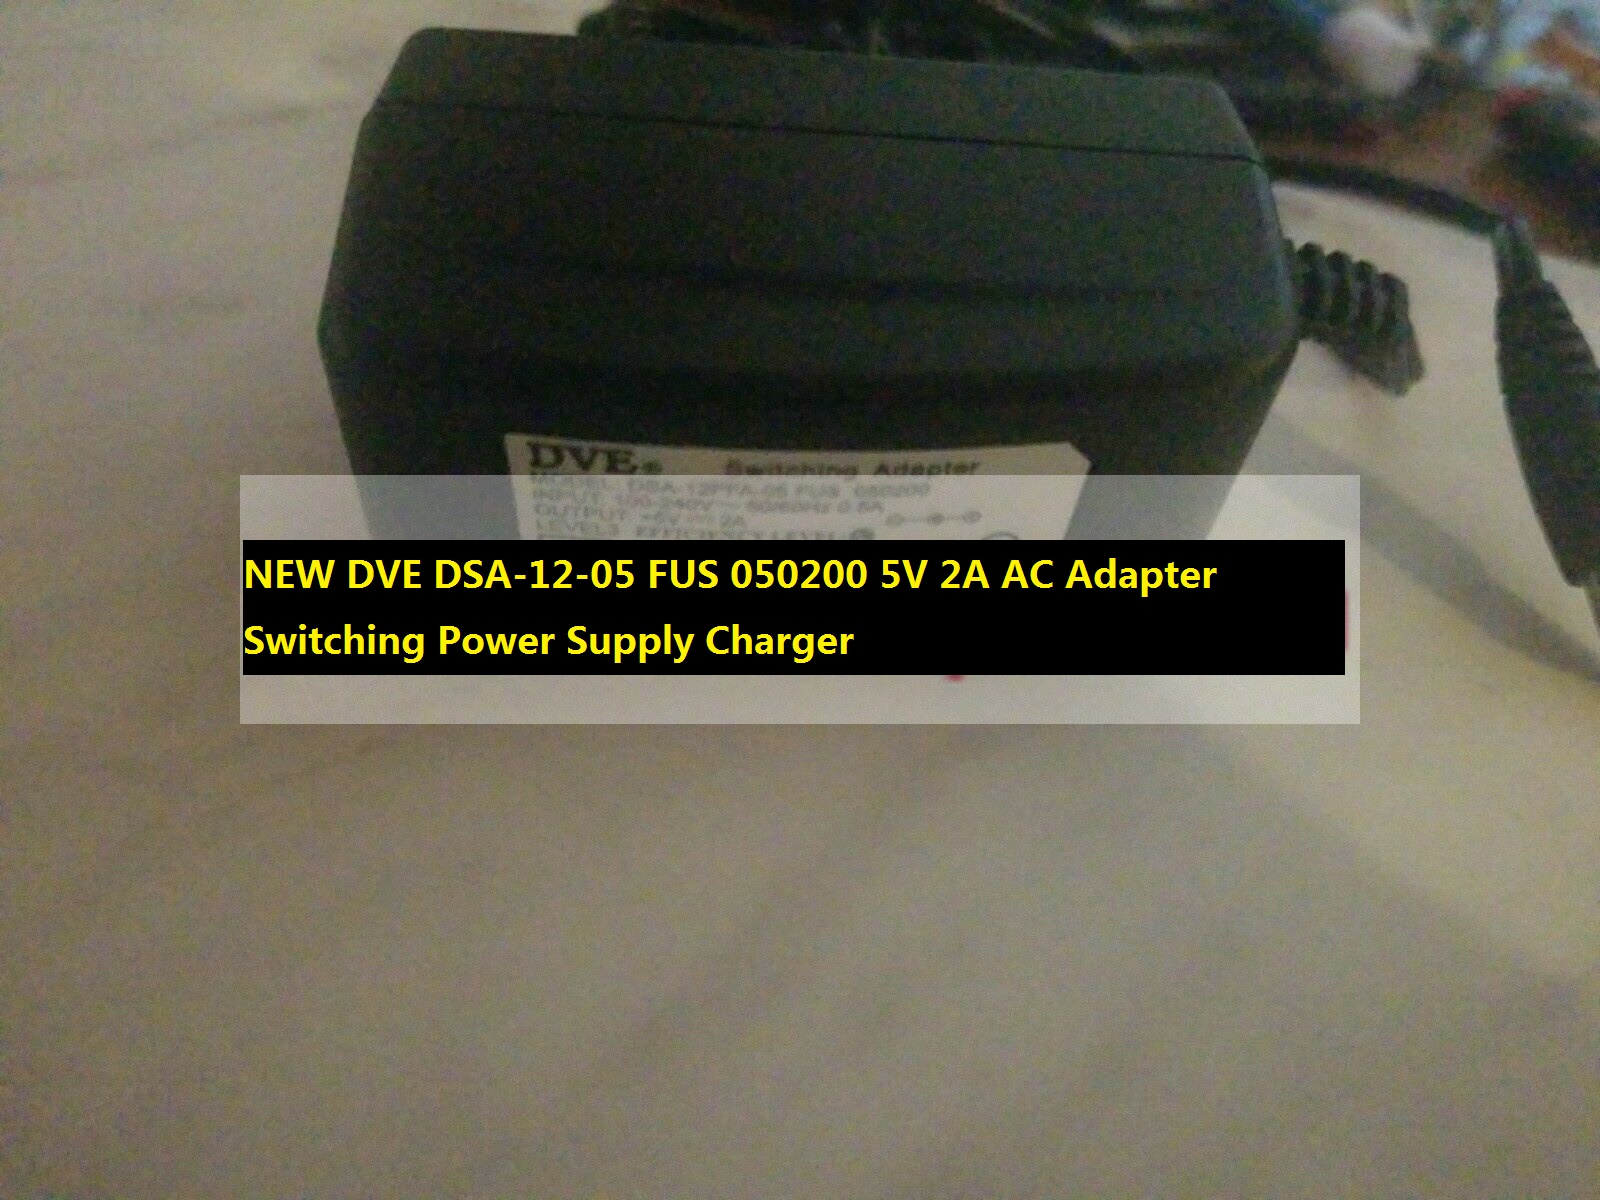 *Brand NEW*5V 2A AC Adapter DVE DSA-12-05 FUS 050200 Switching Power Supply Charger